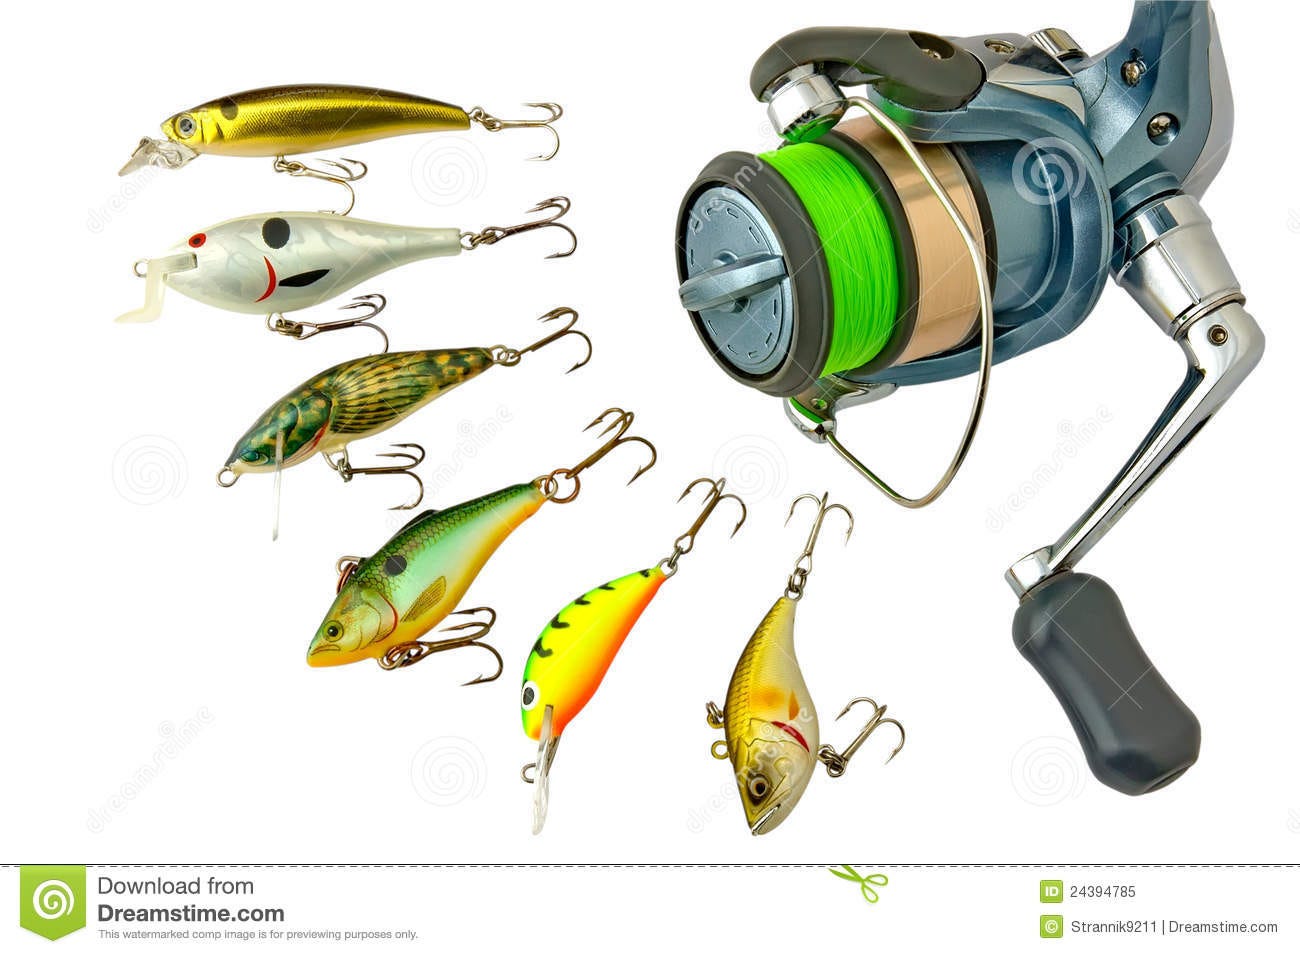 Fishing accessories online India. J-buy is a great place to buy